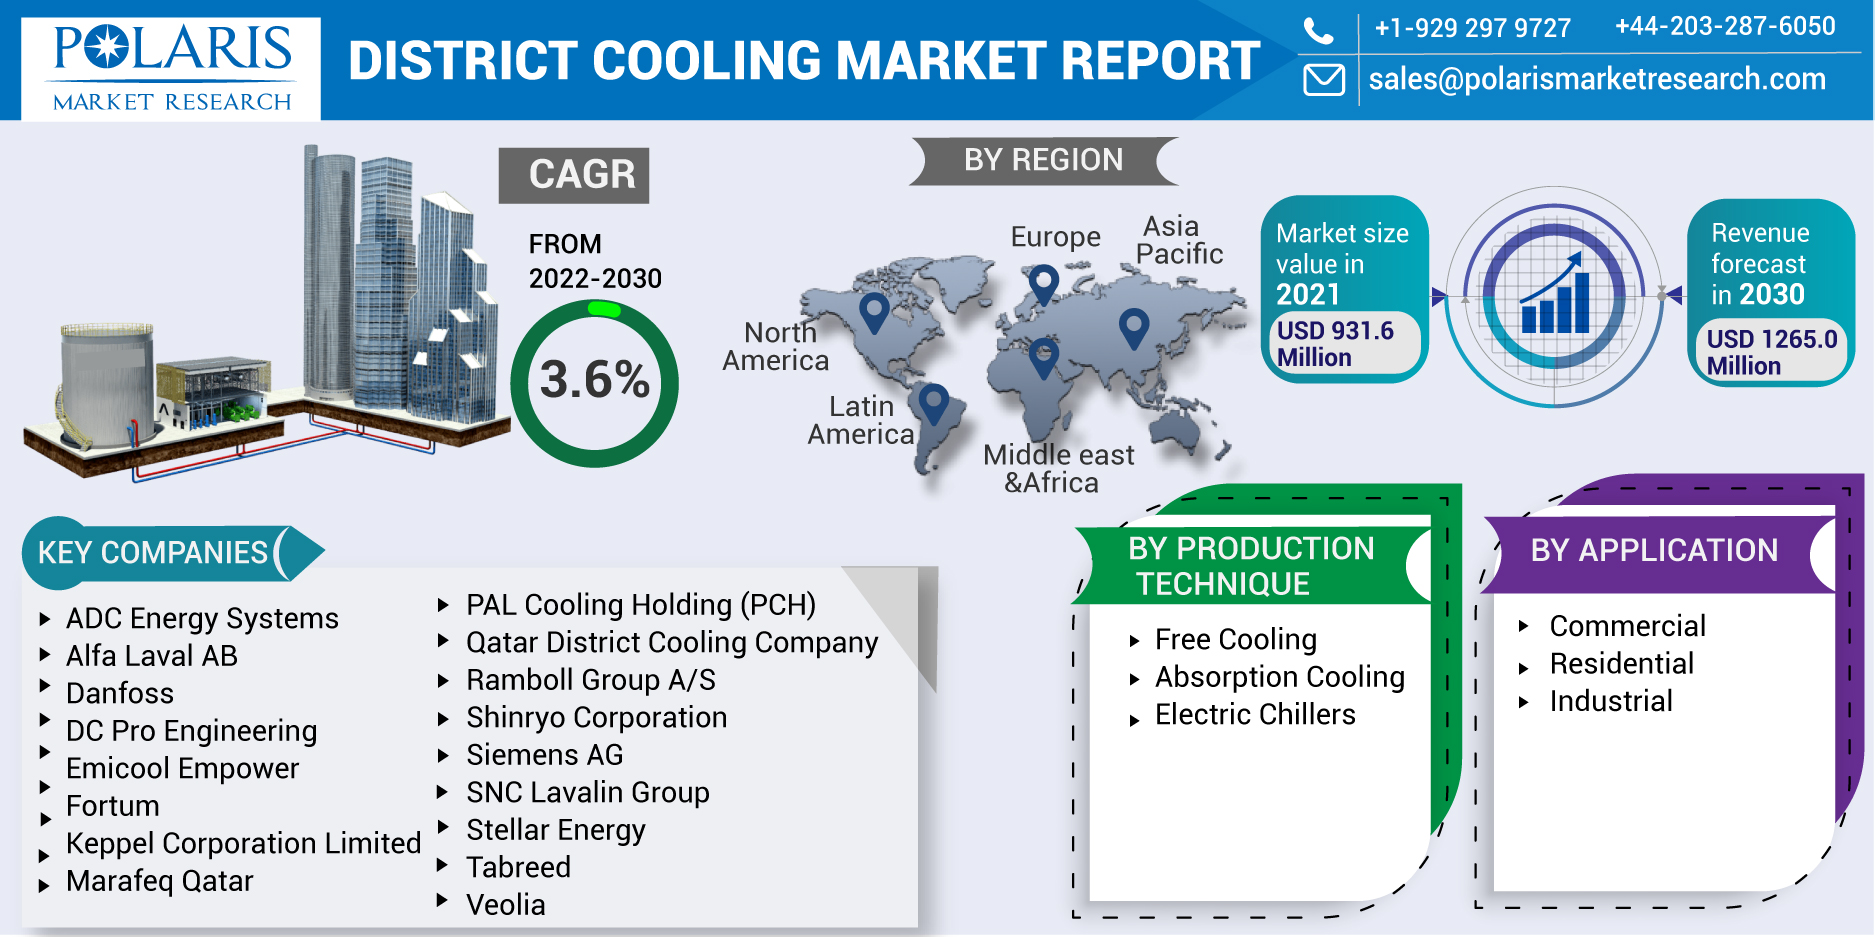 DISTRICT_COOLING_MARKET_REPORT-0119